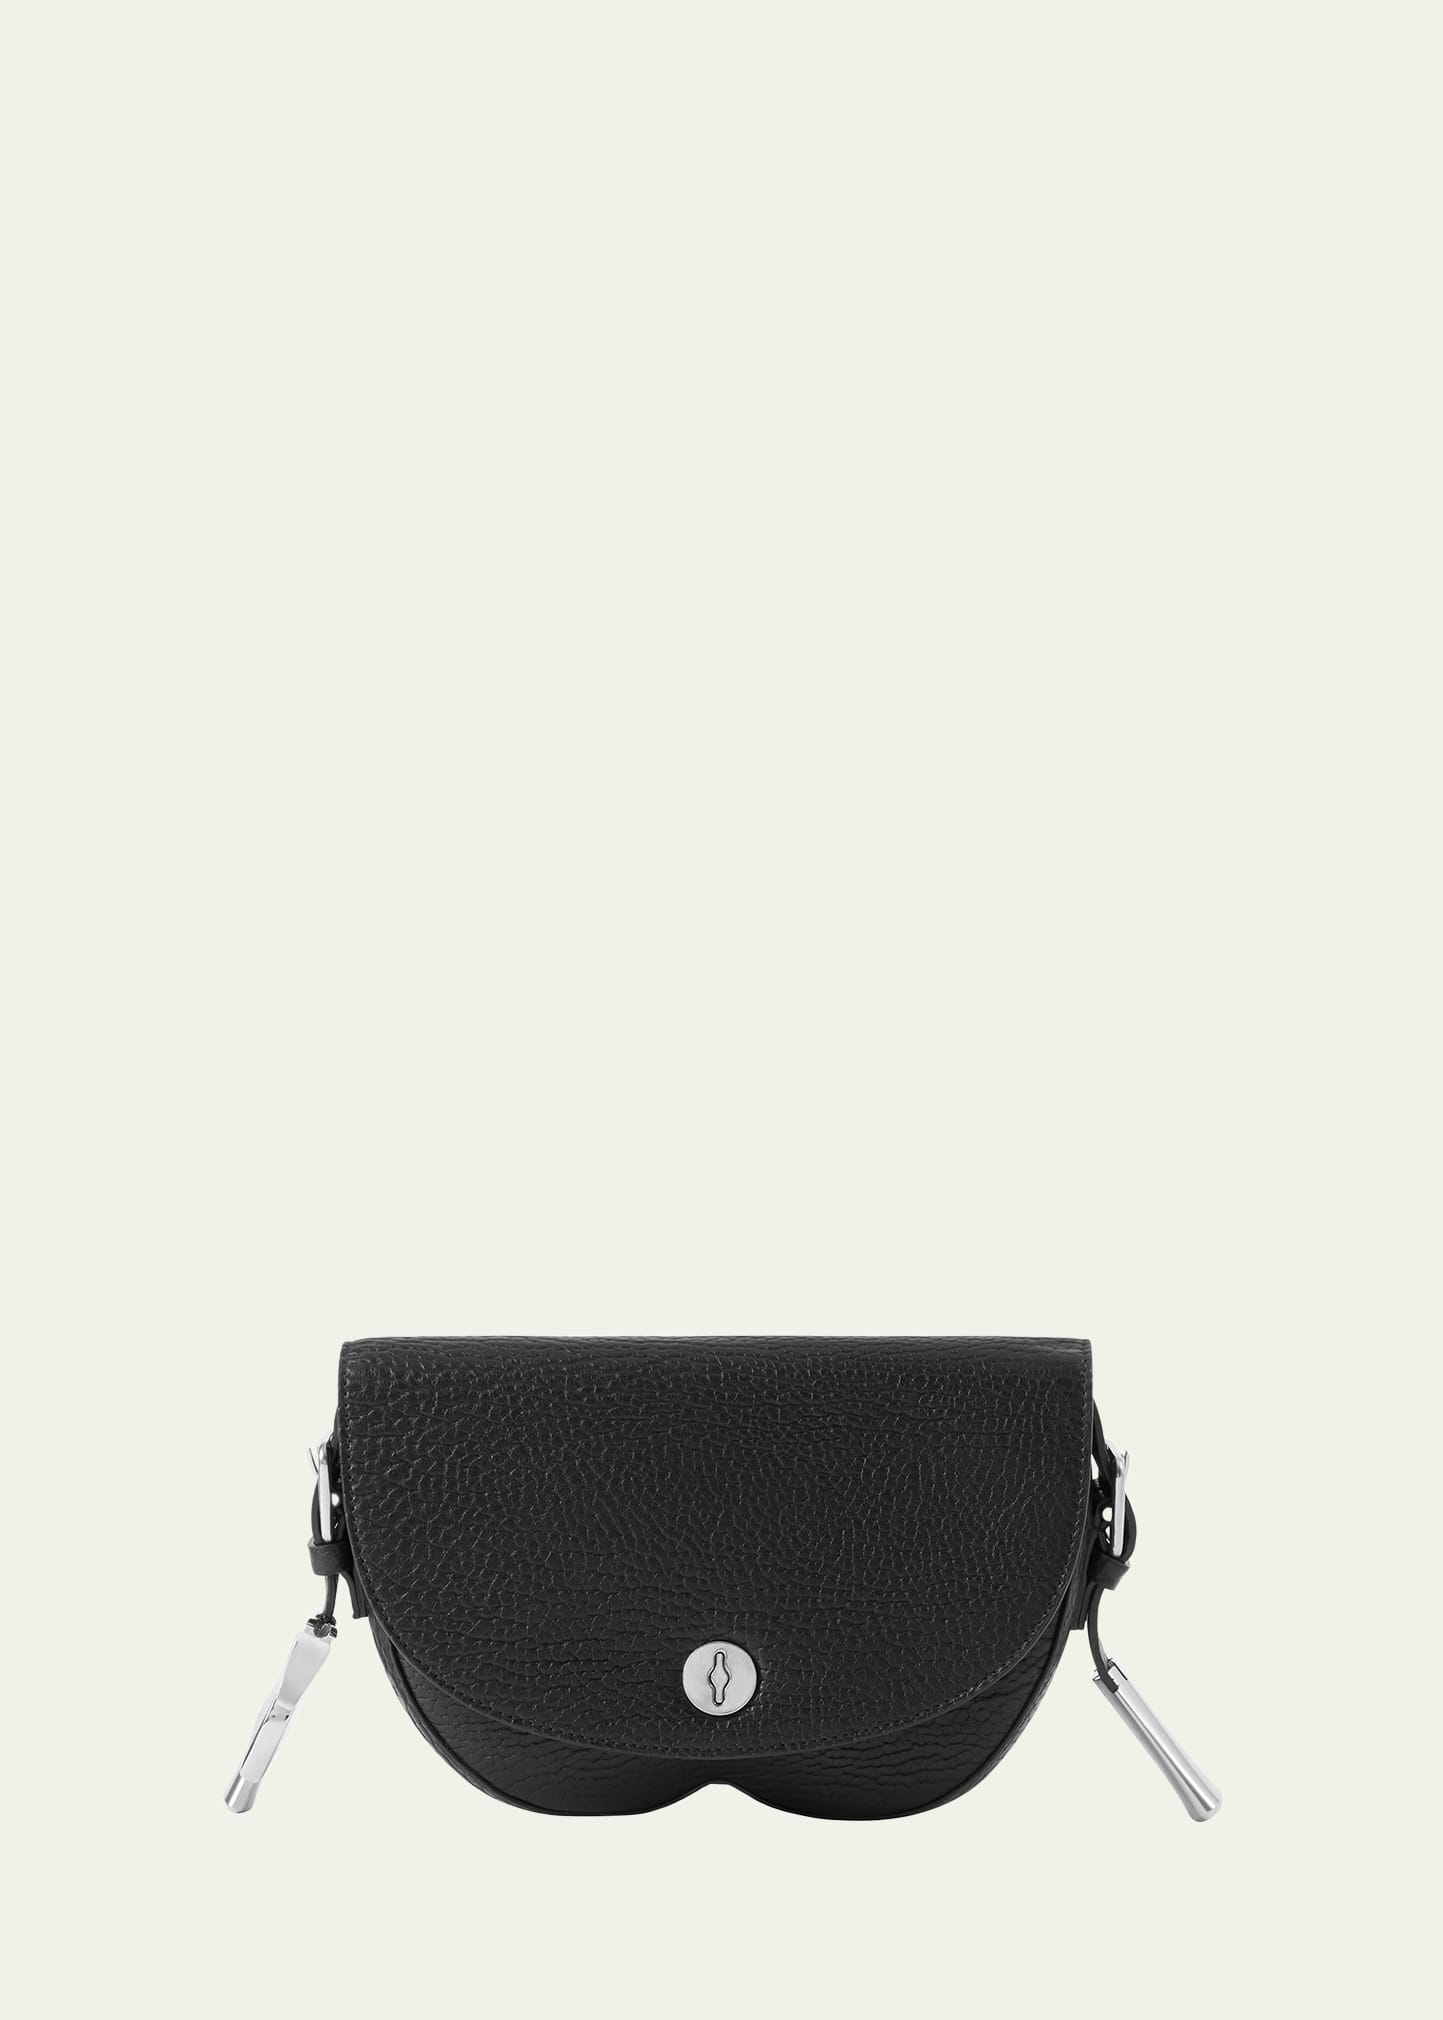 Burberry Small Pebbled Leather Belt Bag